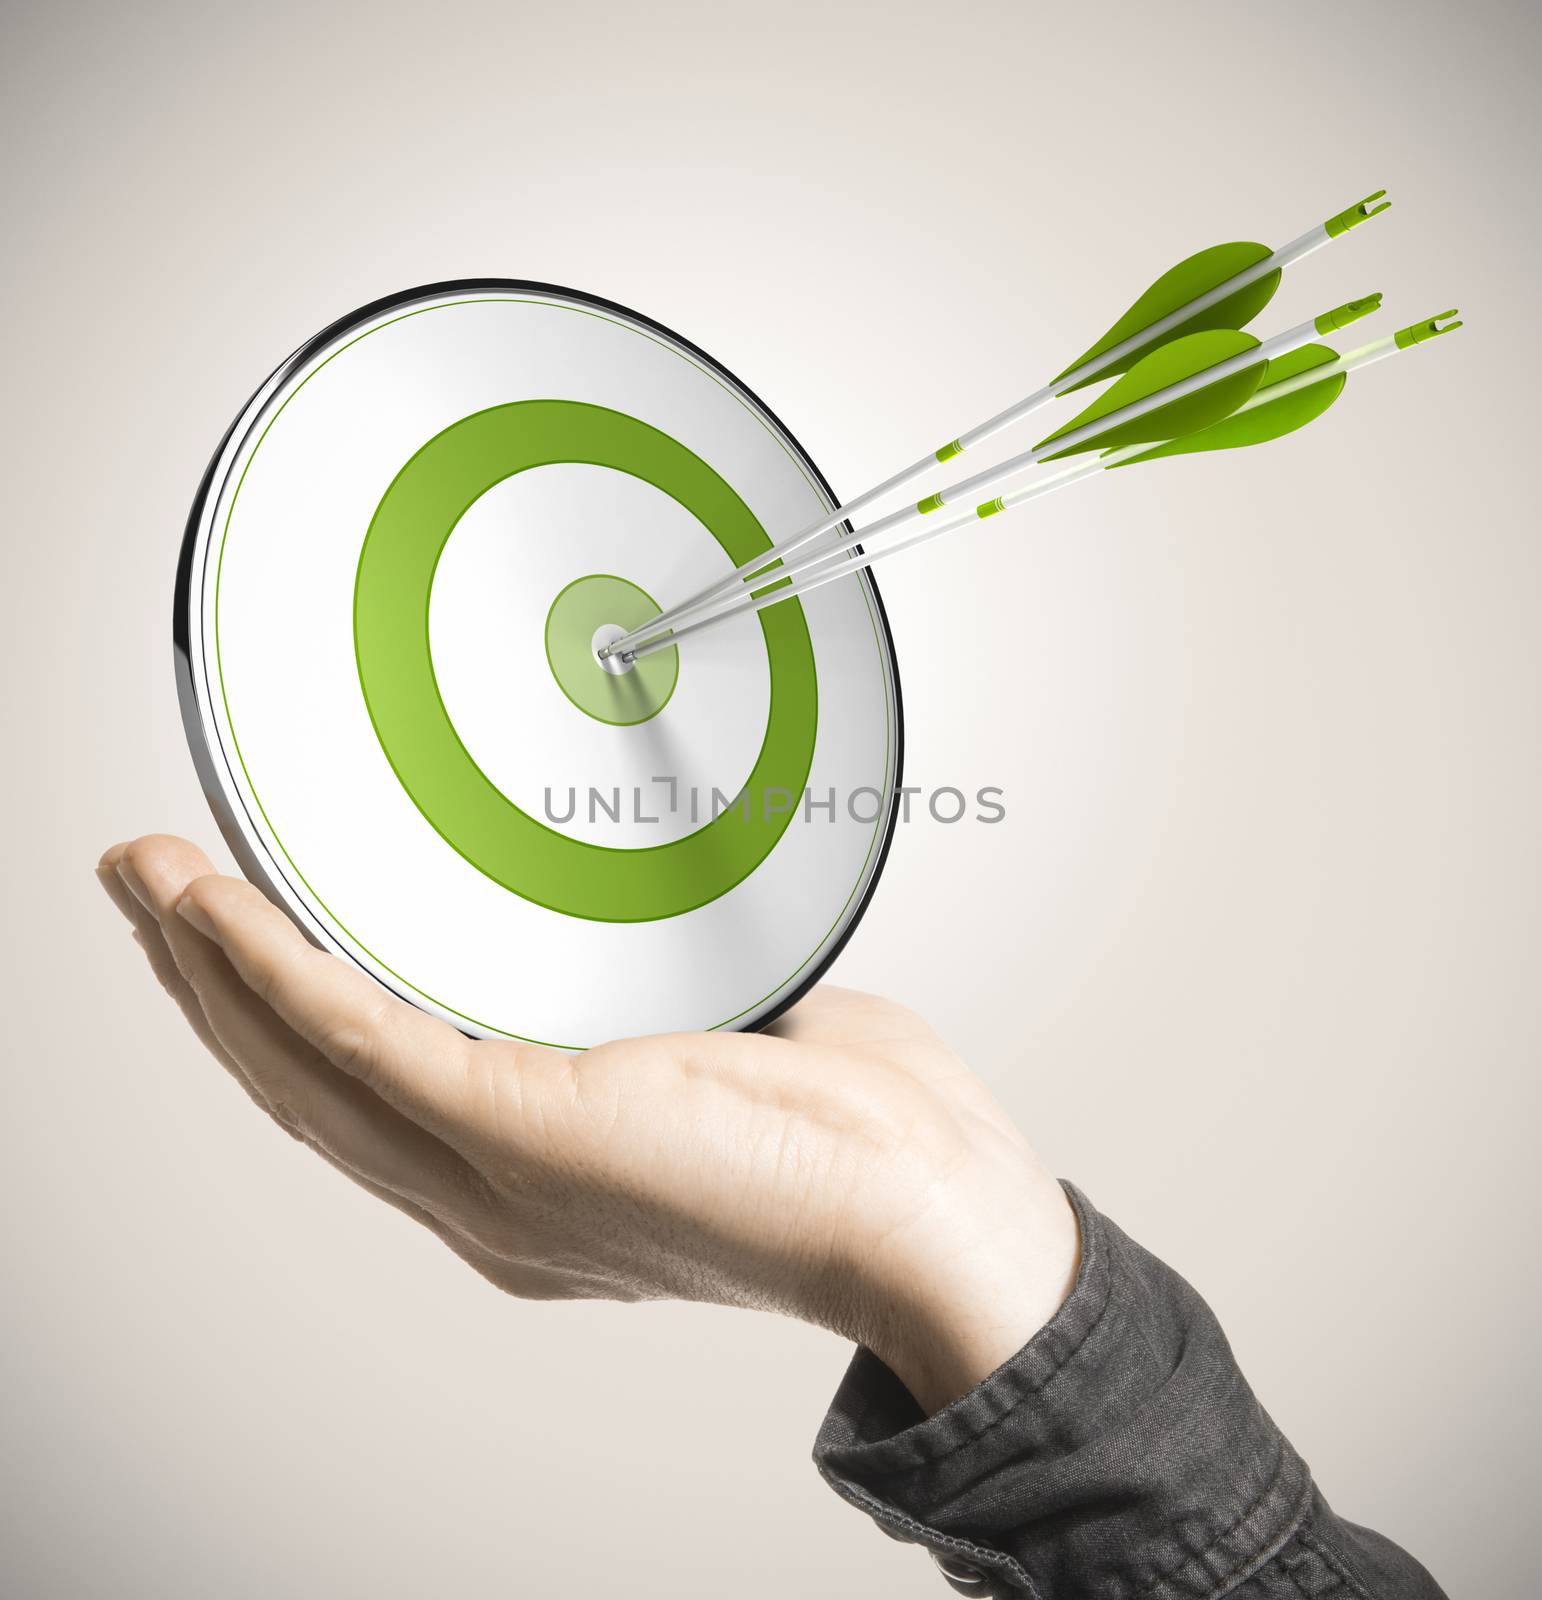 Hand holding a green target with three arrows hitting the center over beige background. Business performance concept.